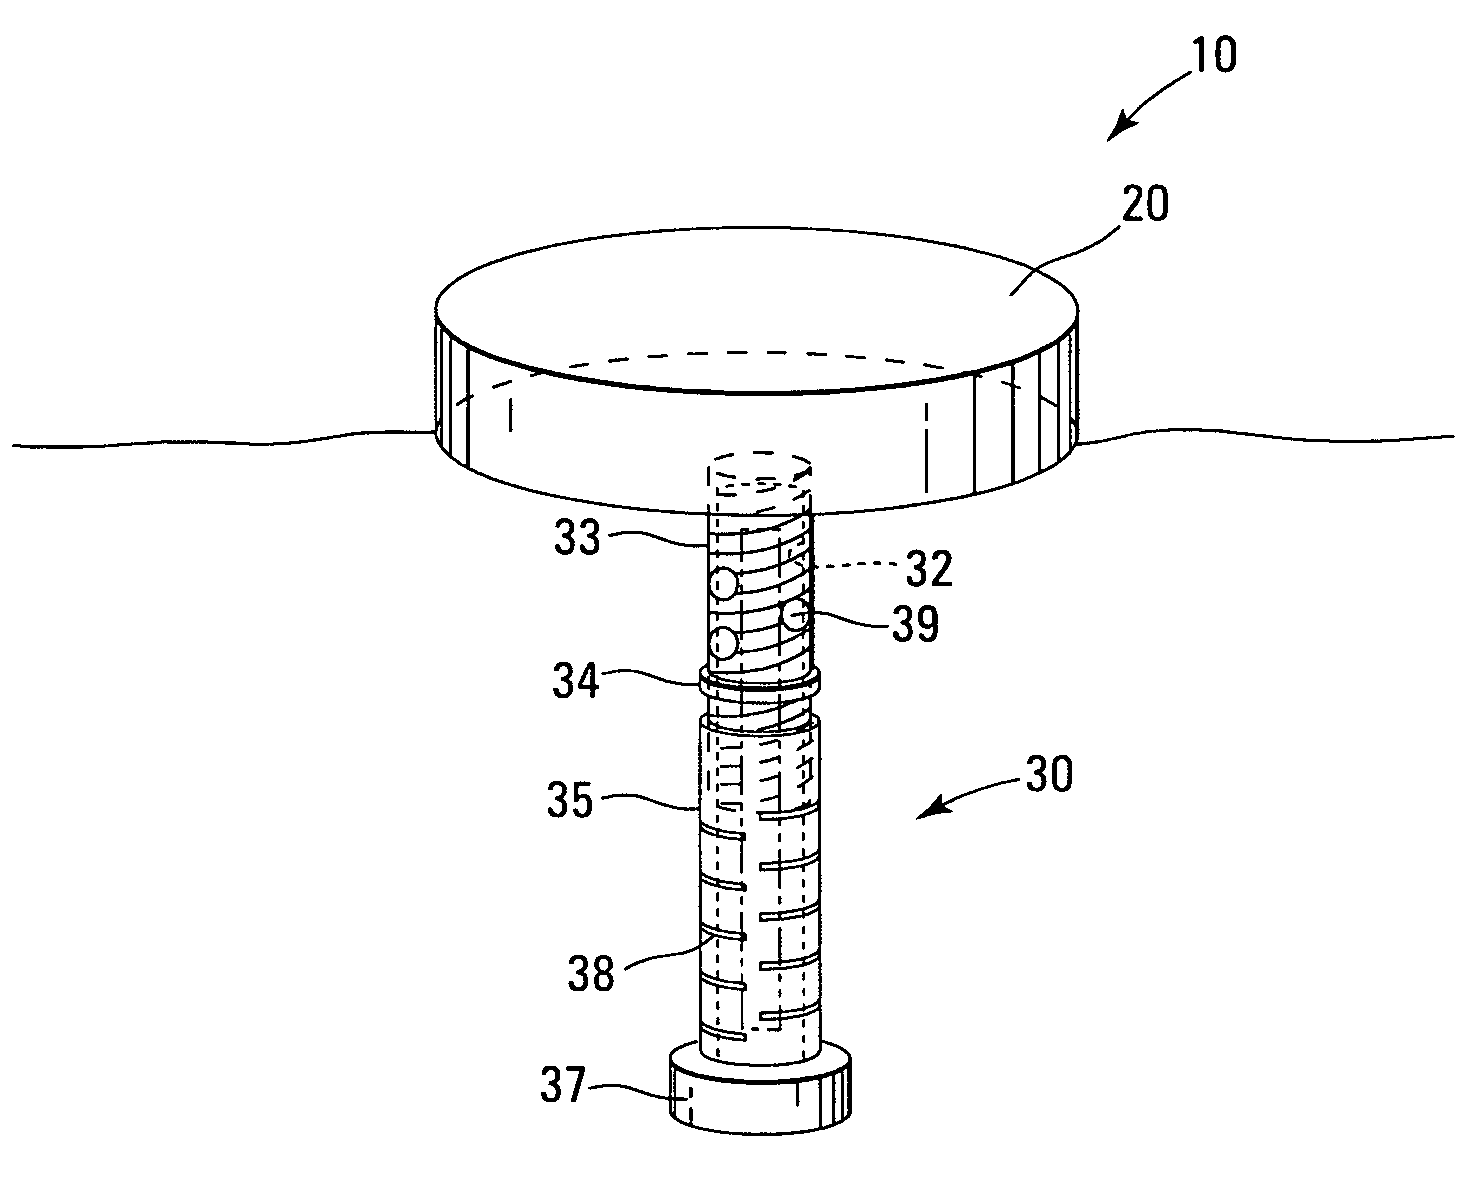 Devices for water treatment